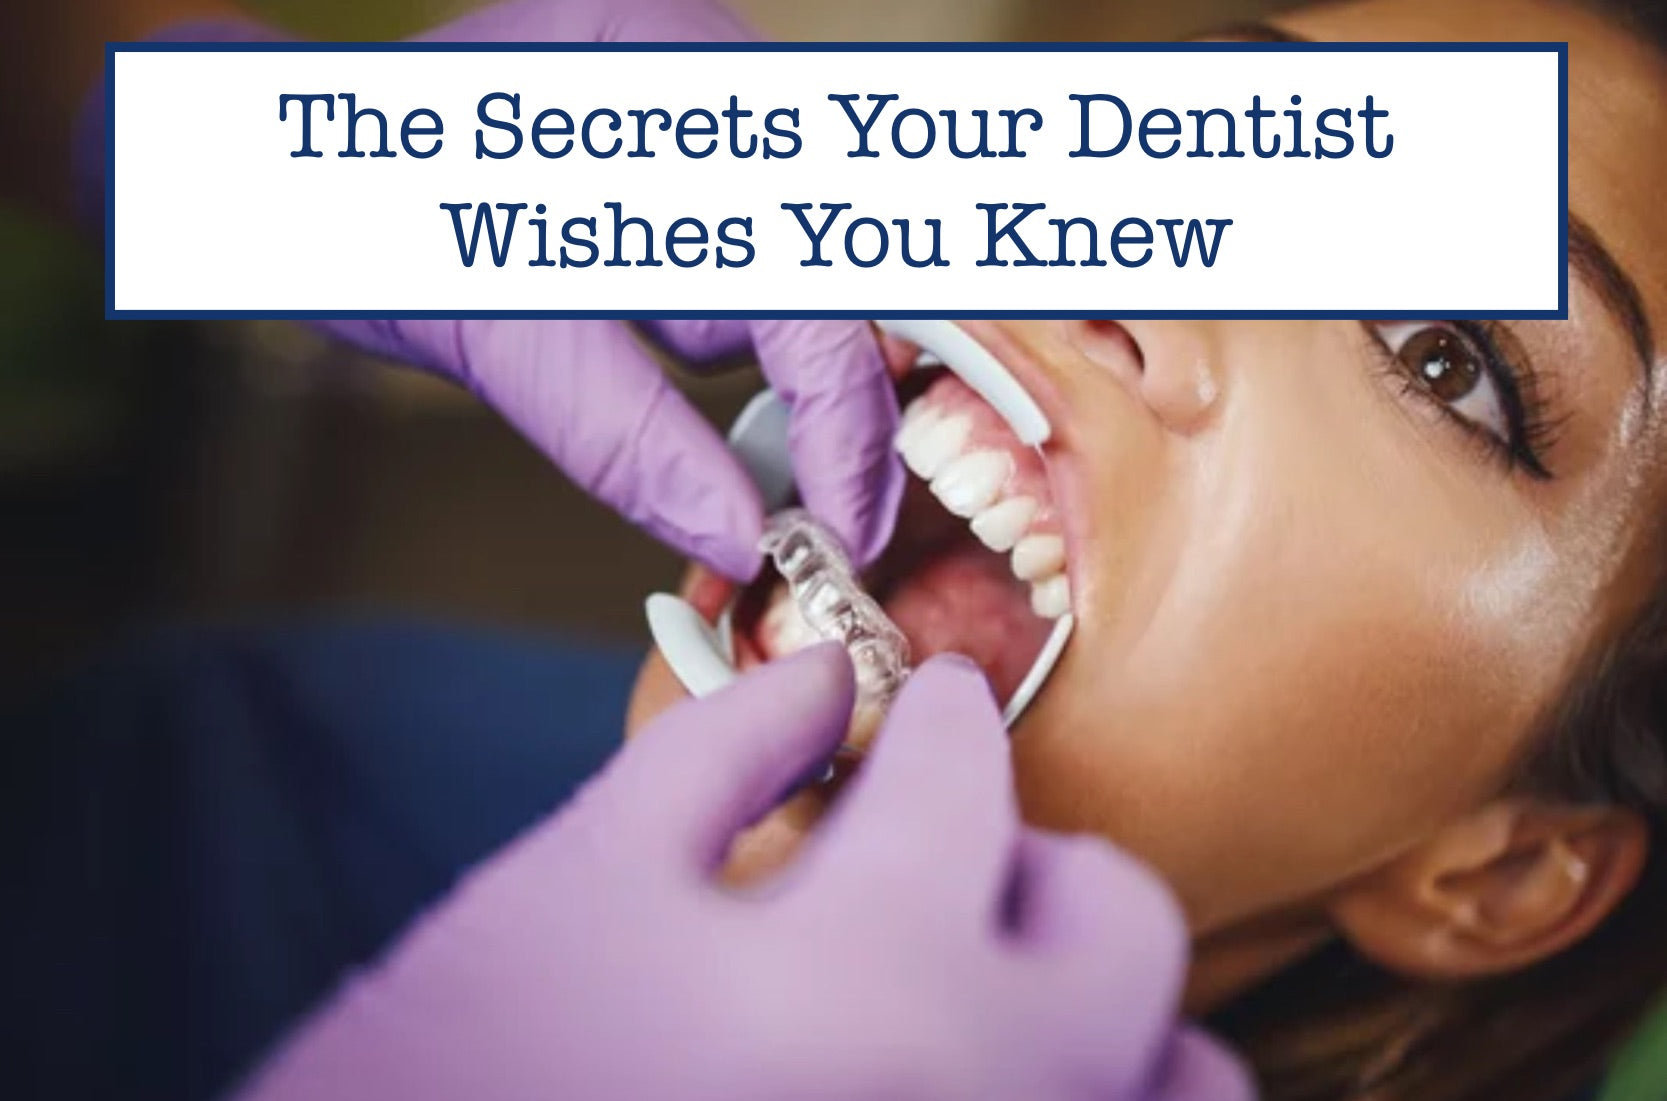 The Secrets Your Dentist Wishes You Knew